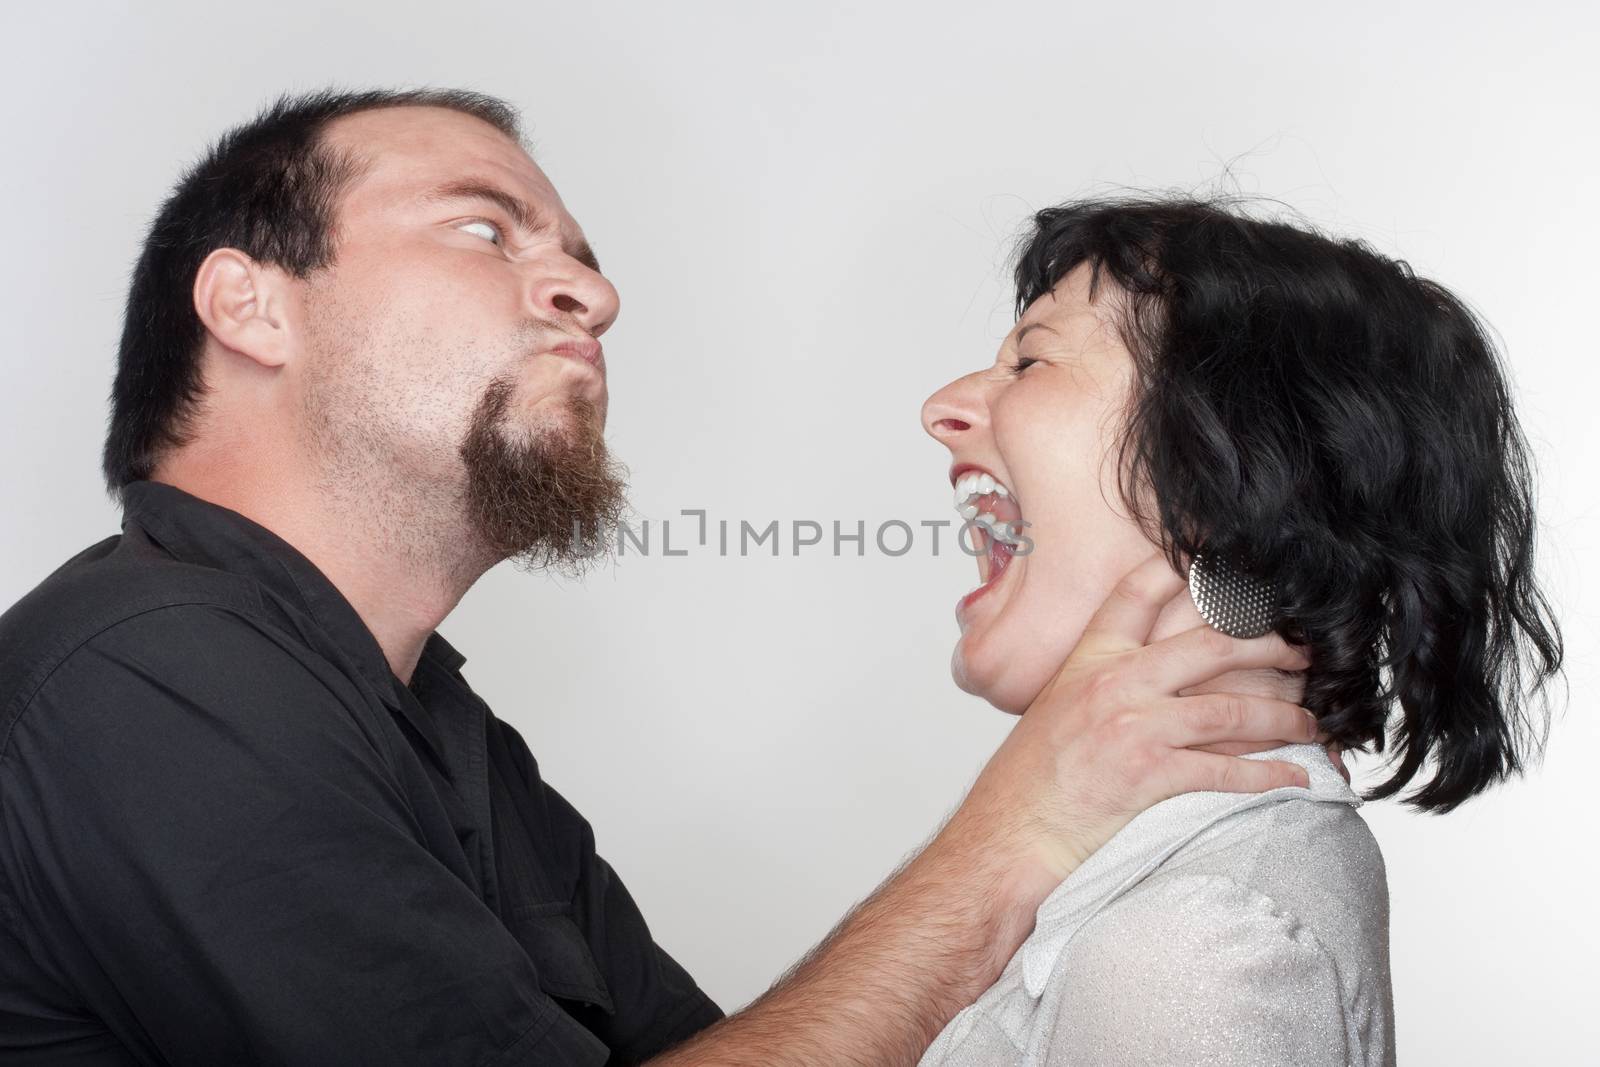 couple fighting, man abusing the woman - isolated on white